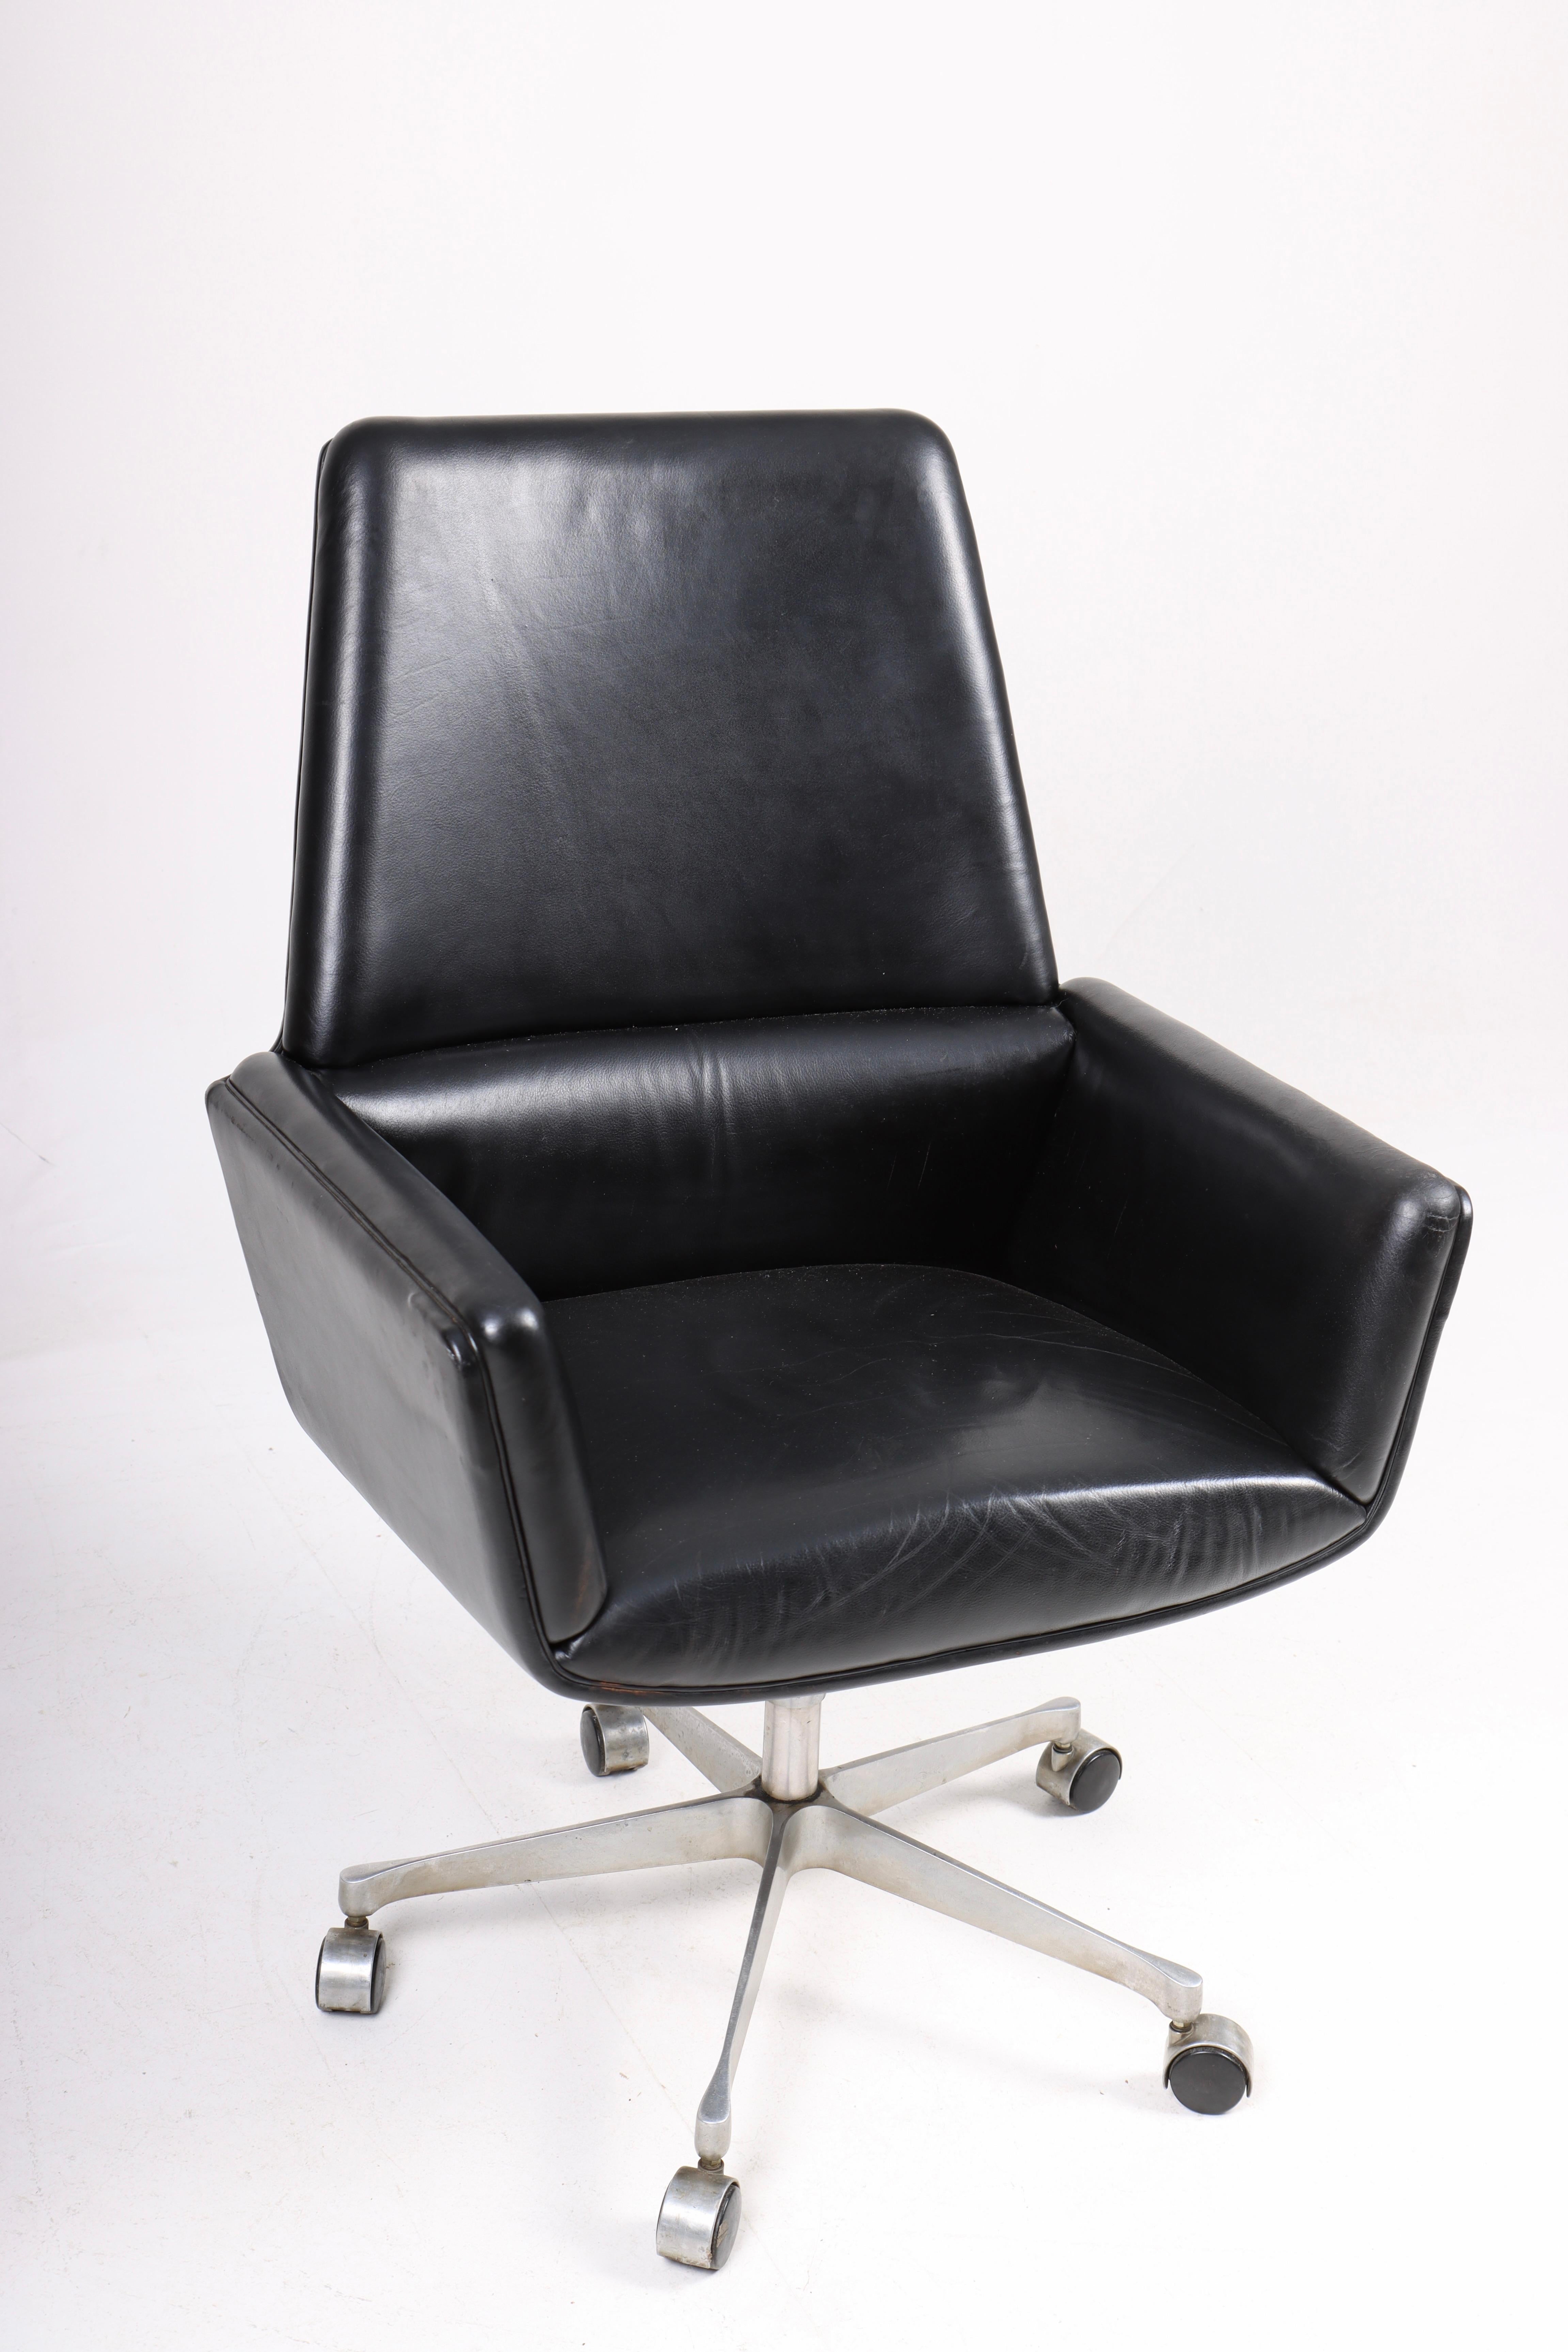 Swivel chair in patinated leather designed by Finn Juhl M.A.A for France & Son. Made in Denmark. Great original condition.